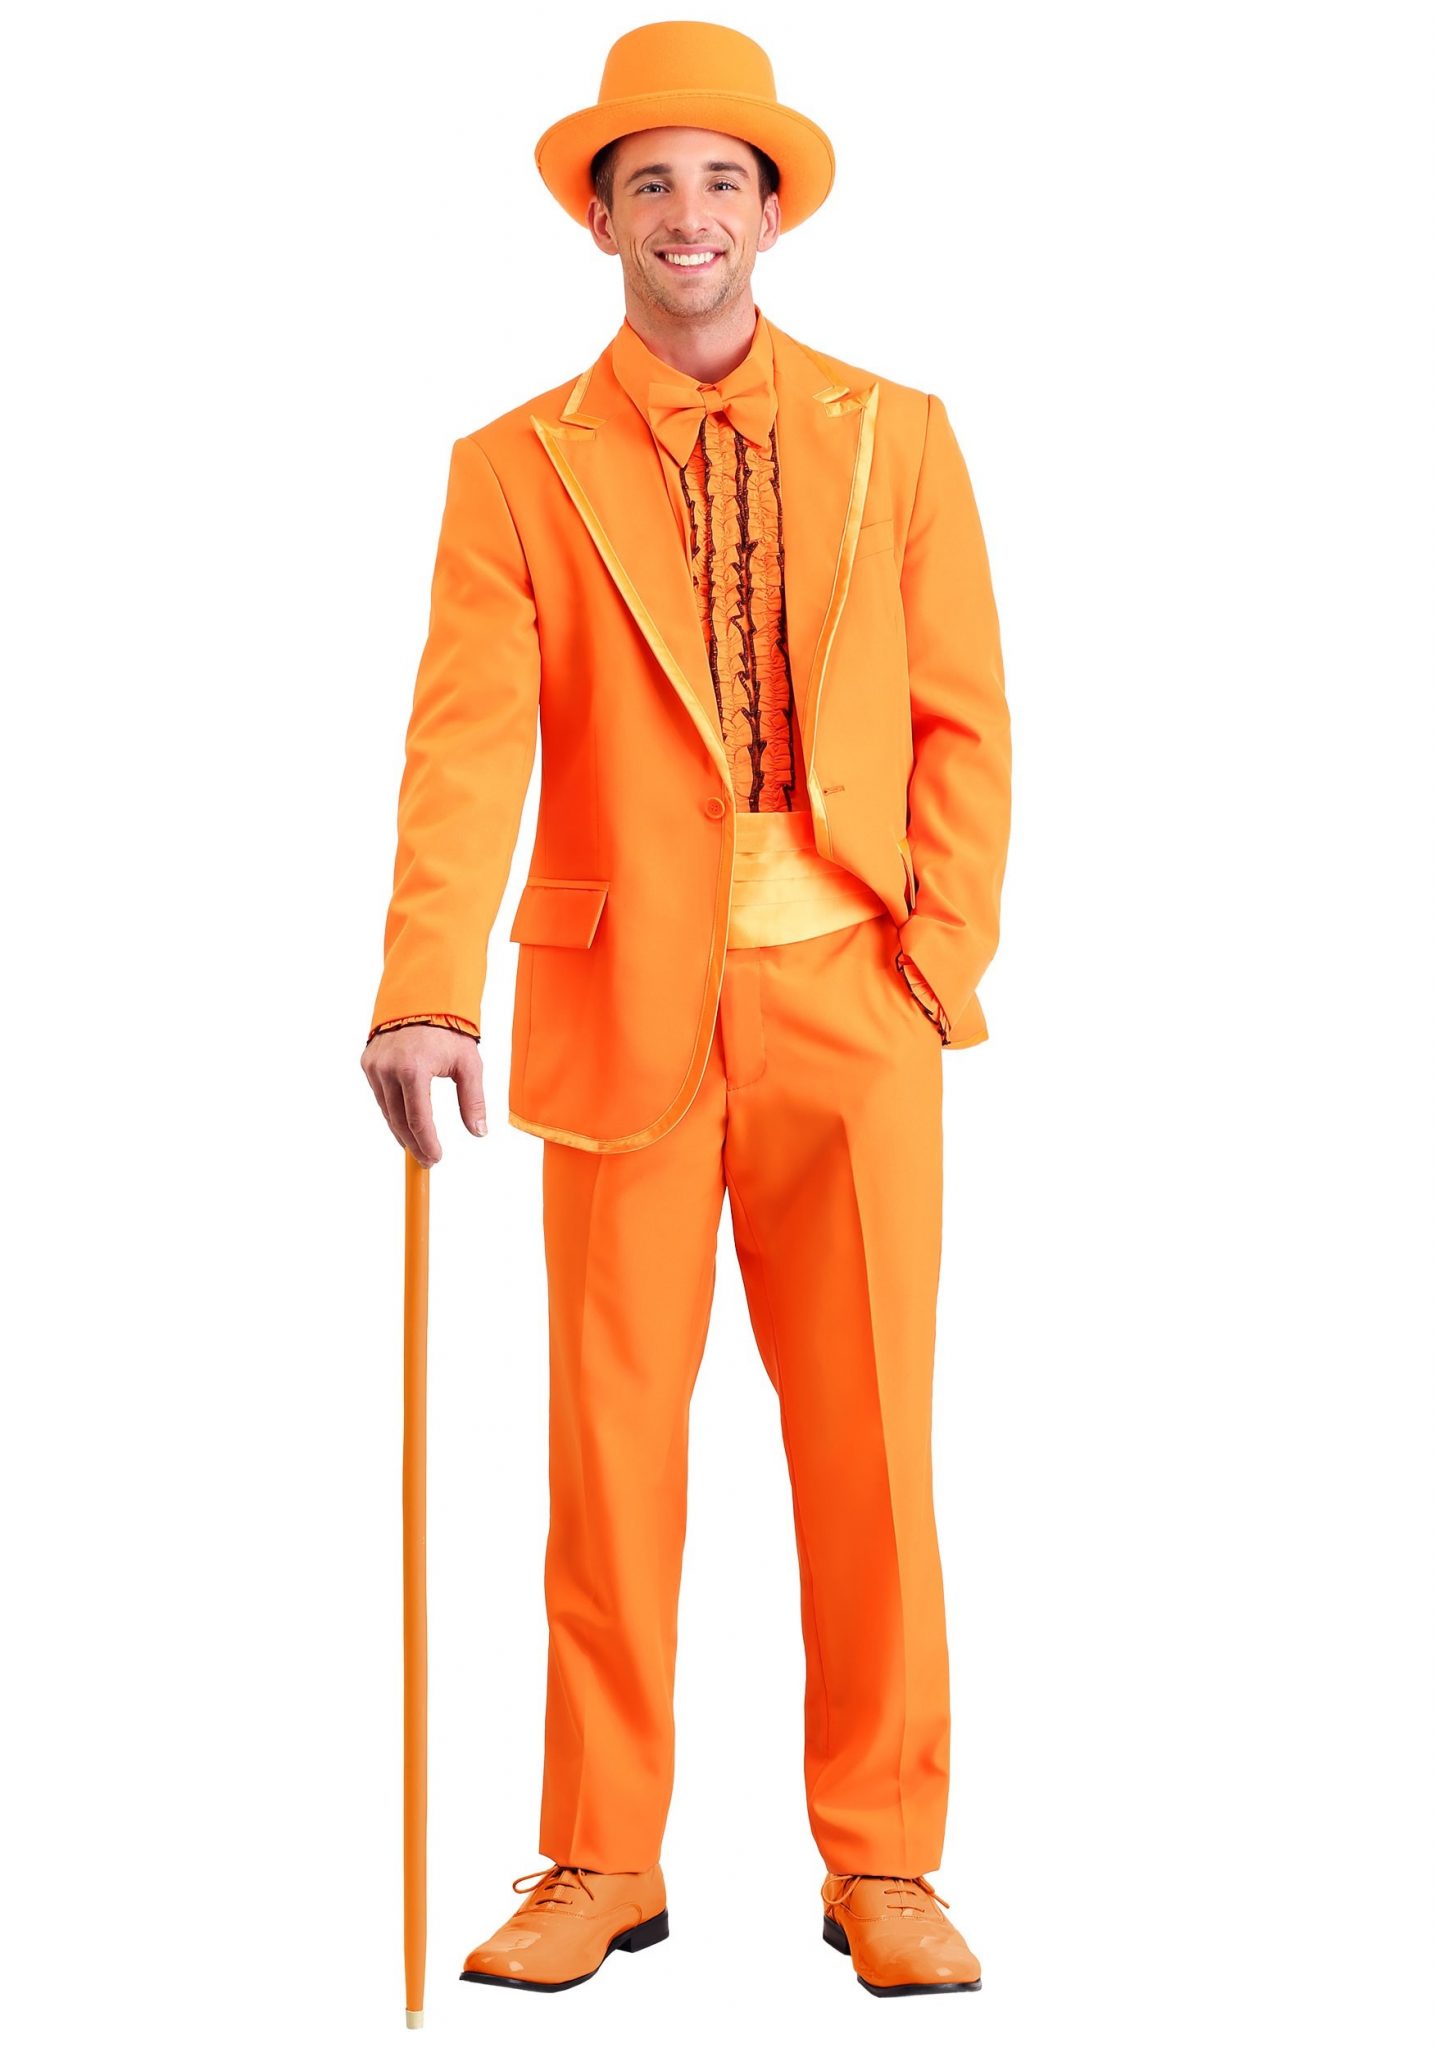 Funny Halloween Costumes You Can Easily Buy Online (for the Whole Family!)